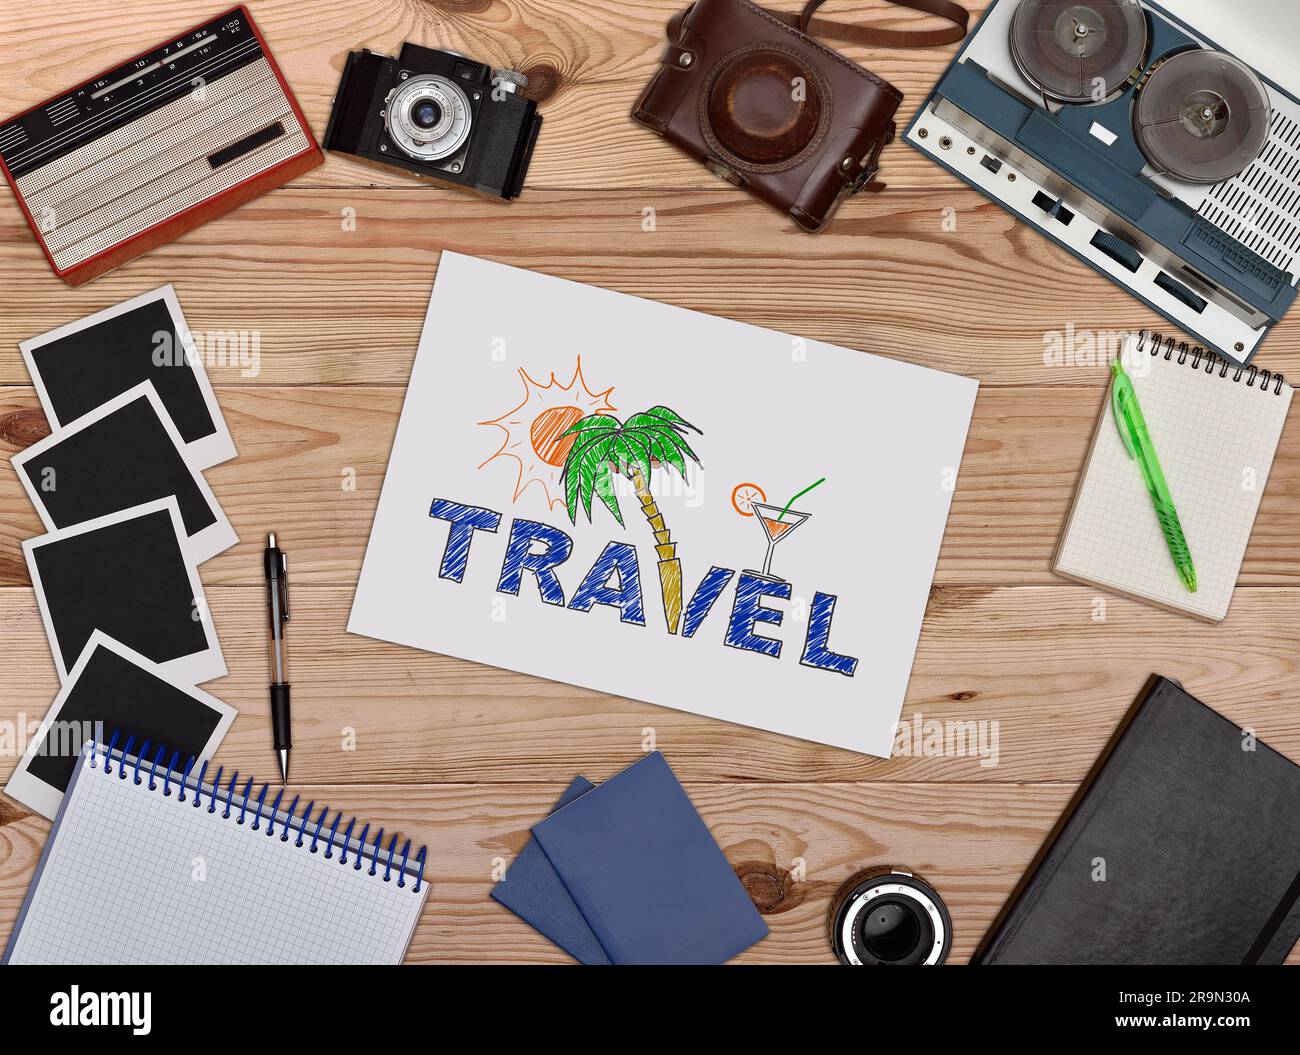 Paper with drawing travel concept. Old retro object on wooden table Stock Photo